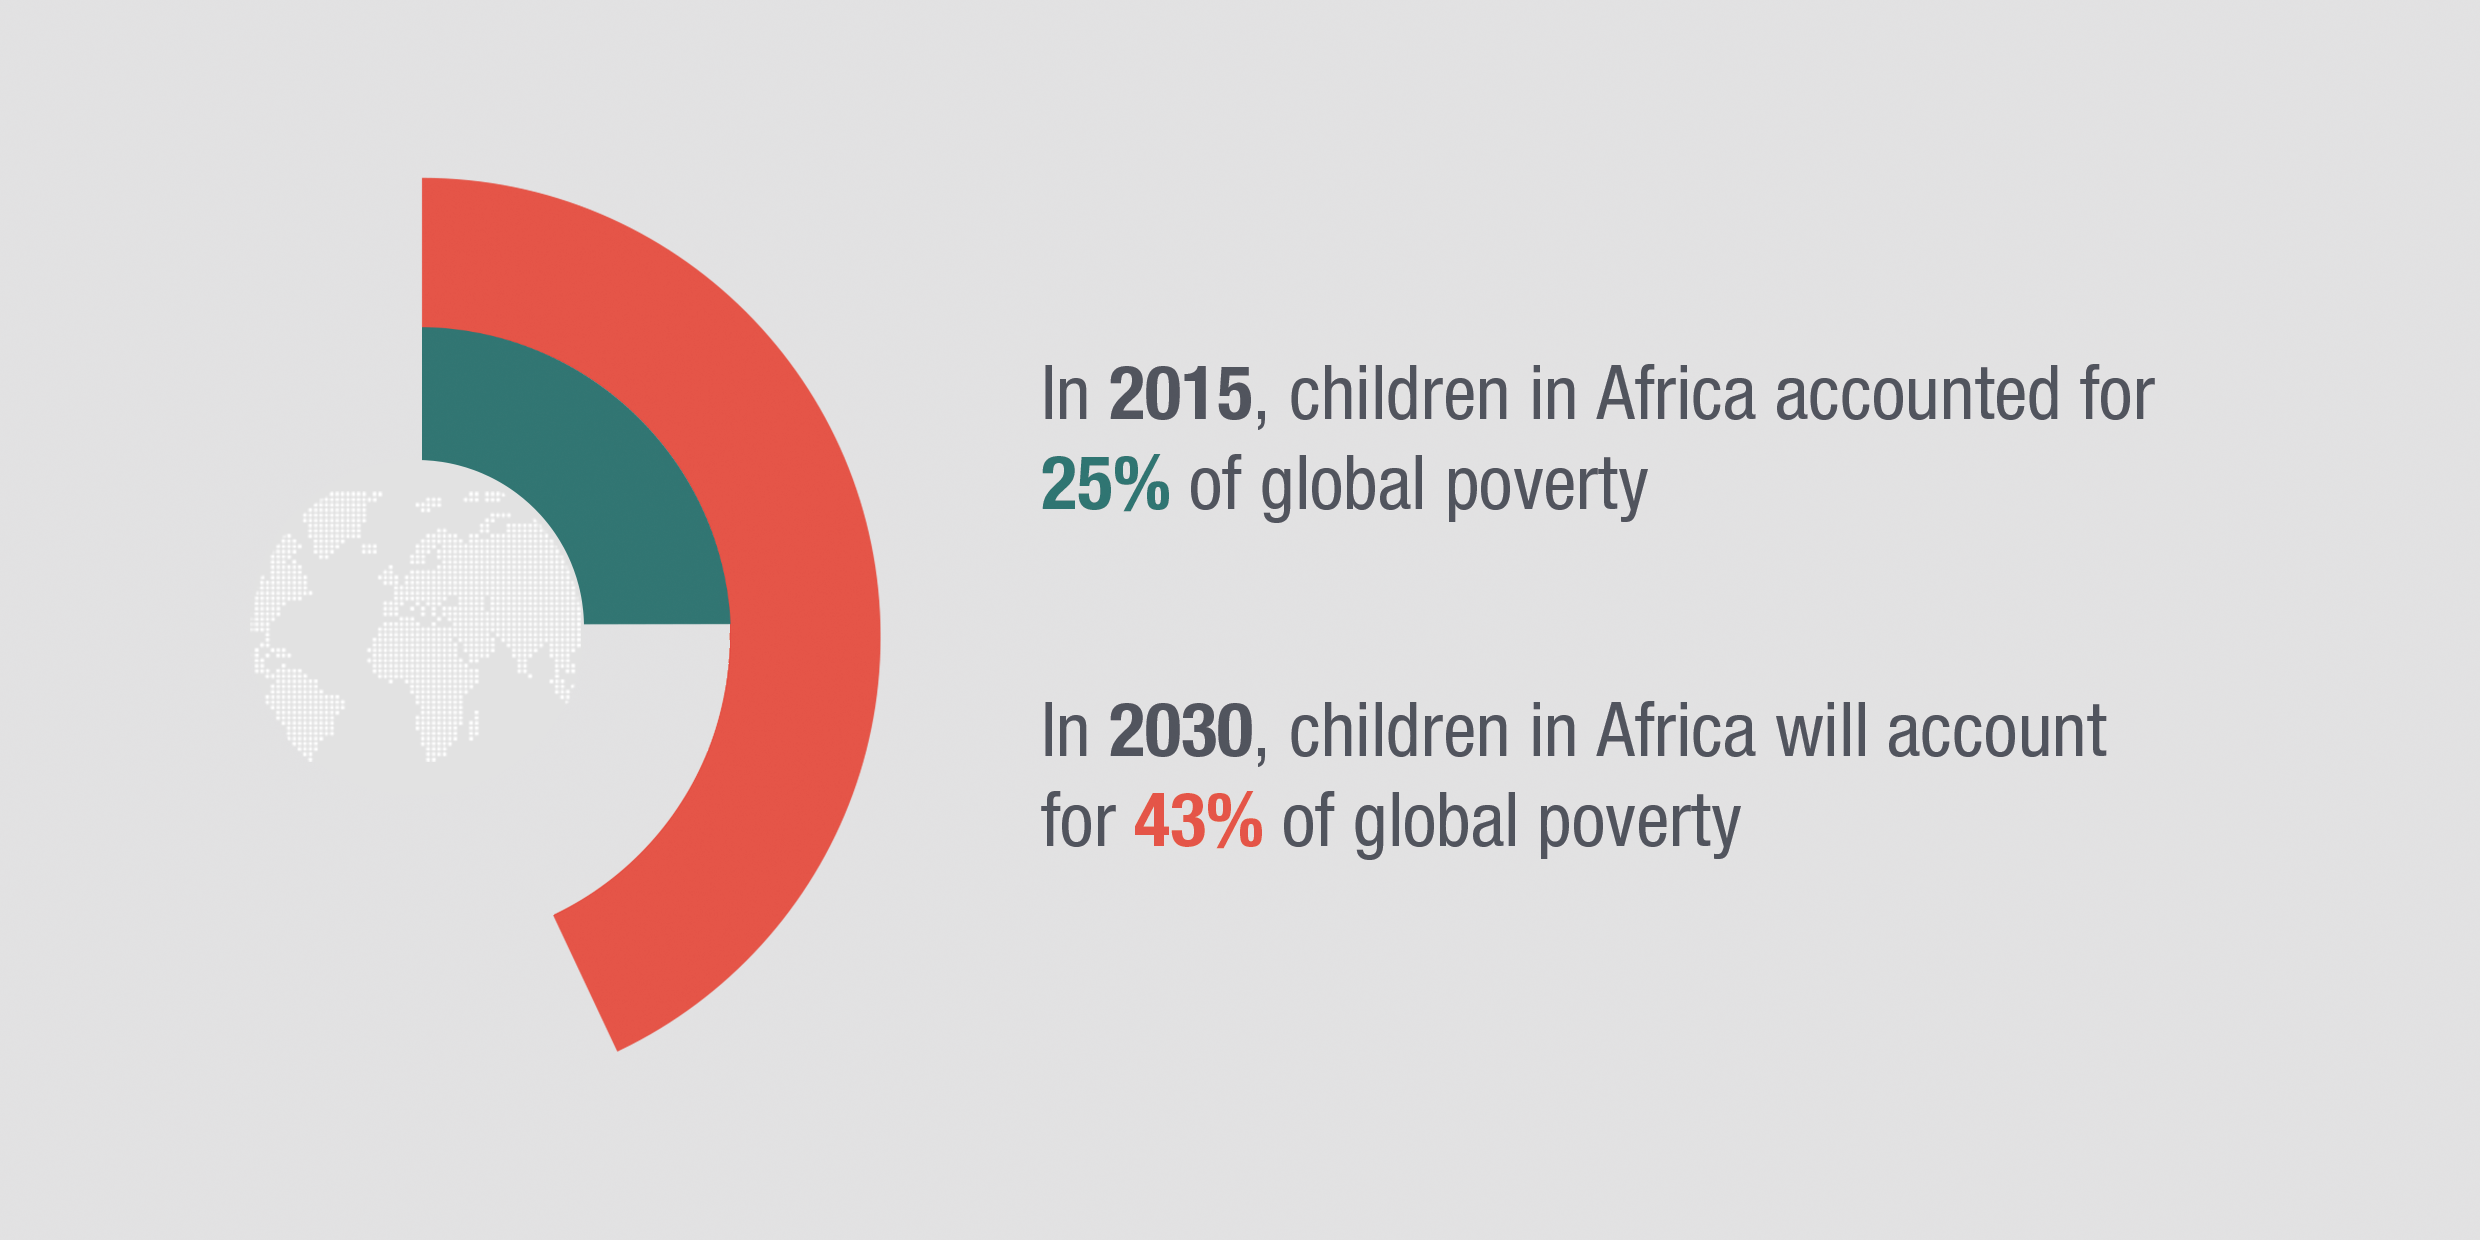 Infographic: by 2030, children in Africa will account for almost half of global poverty